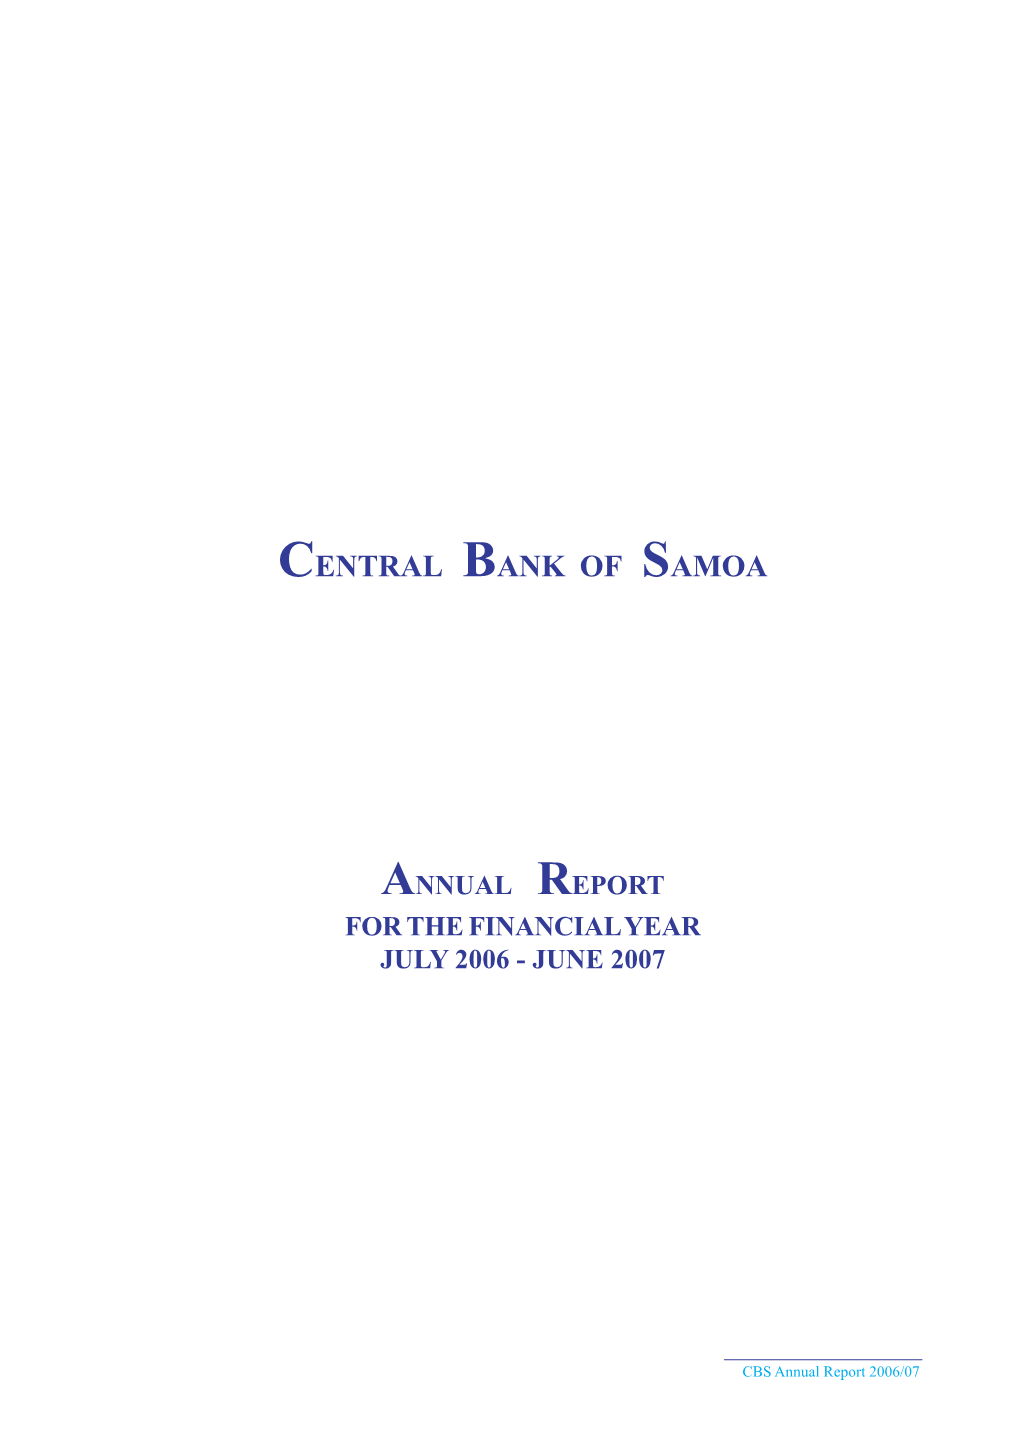 Central Bank of Samoa Annual Report 2006-2007